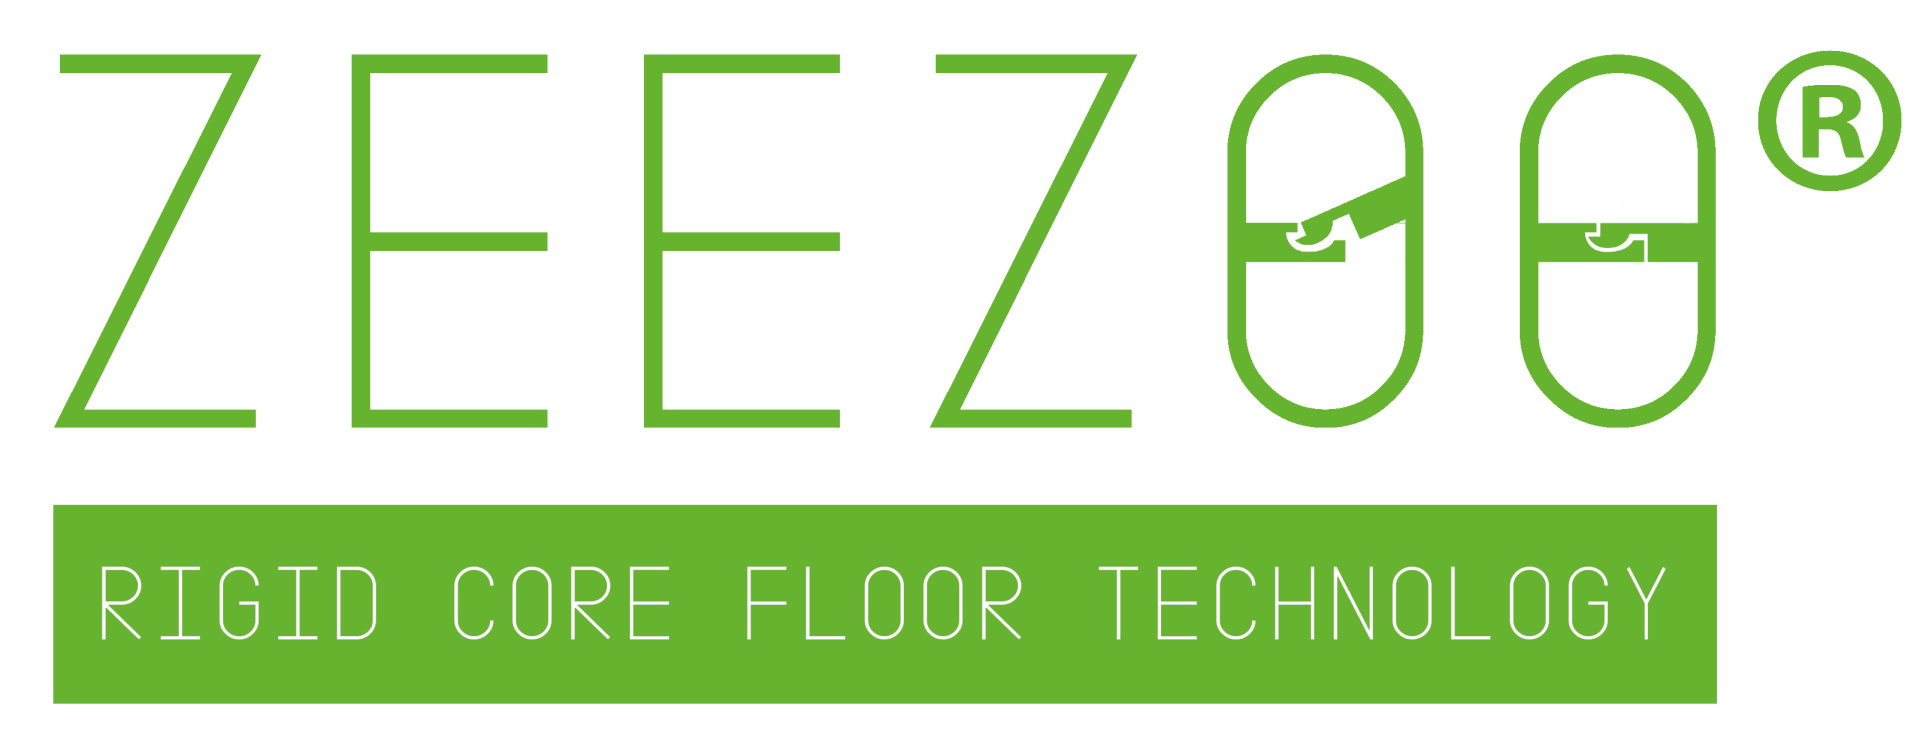 Zeezoo rigid core vinyl flooring Click System Colour Crafted Oak   10 boxes supplied with a combined - Image 4 of 4